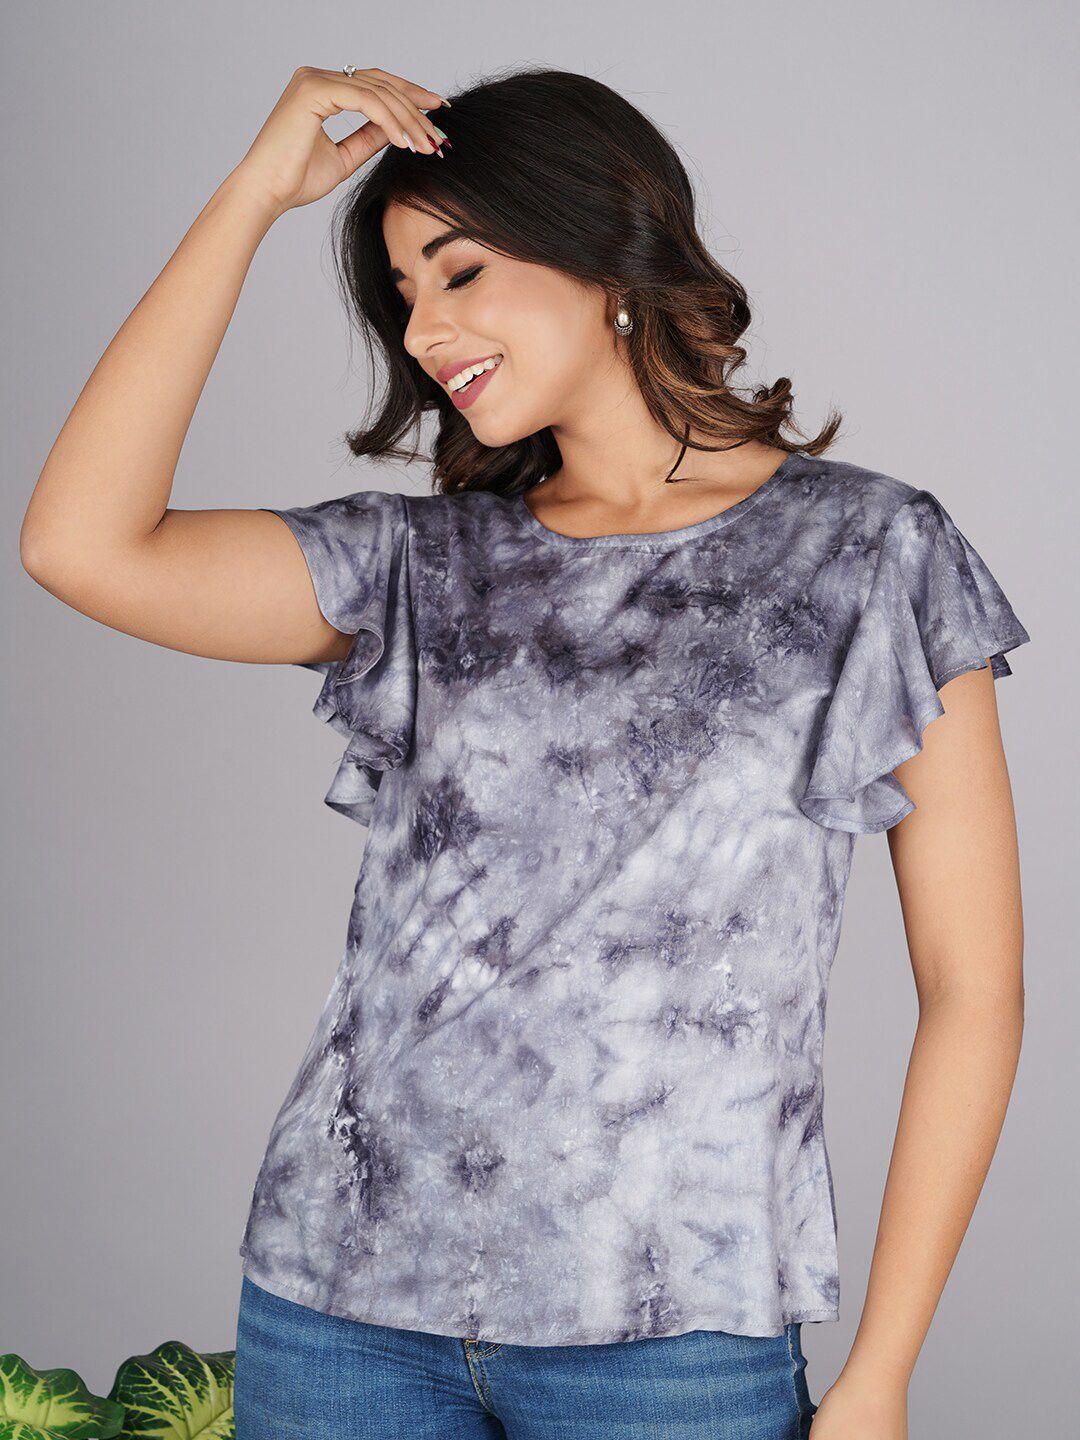 bachuu flutter sleeves tie and dye dyed top